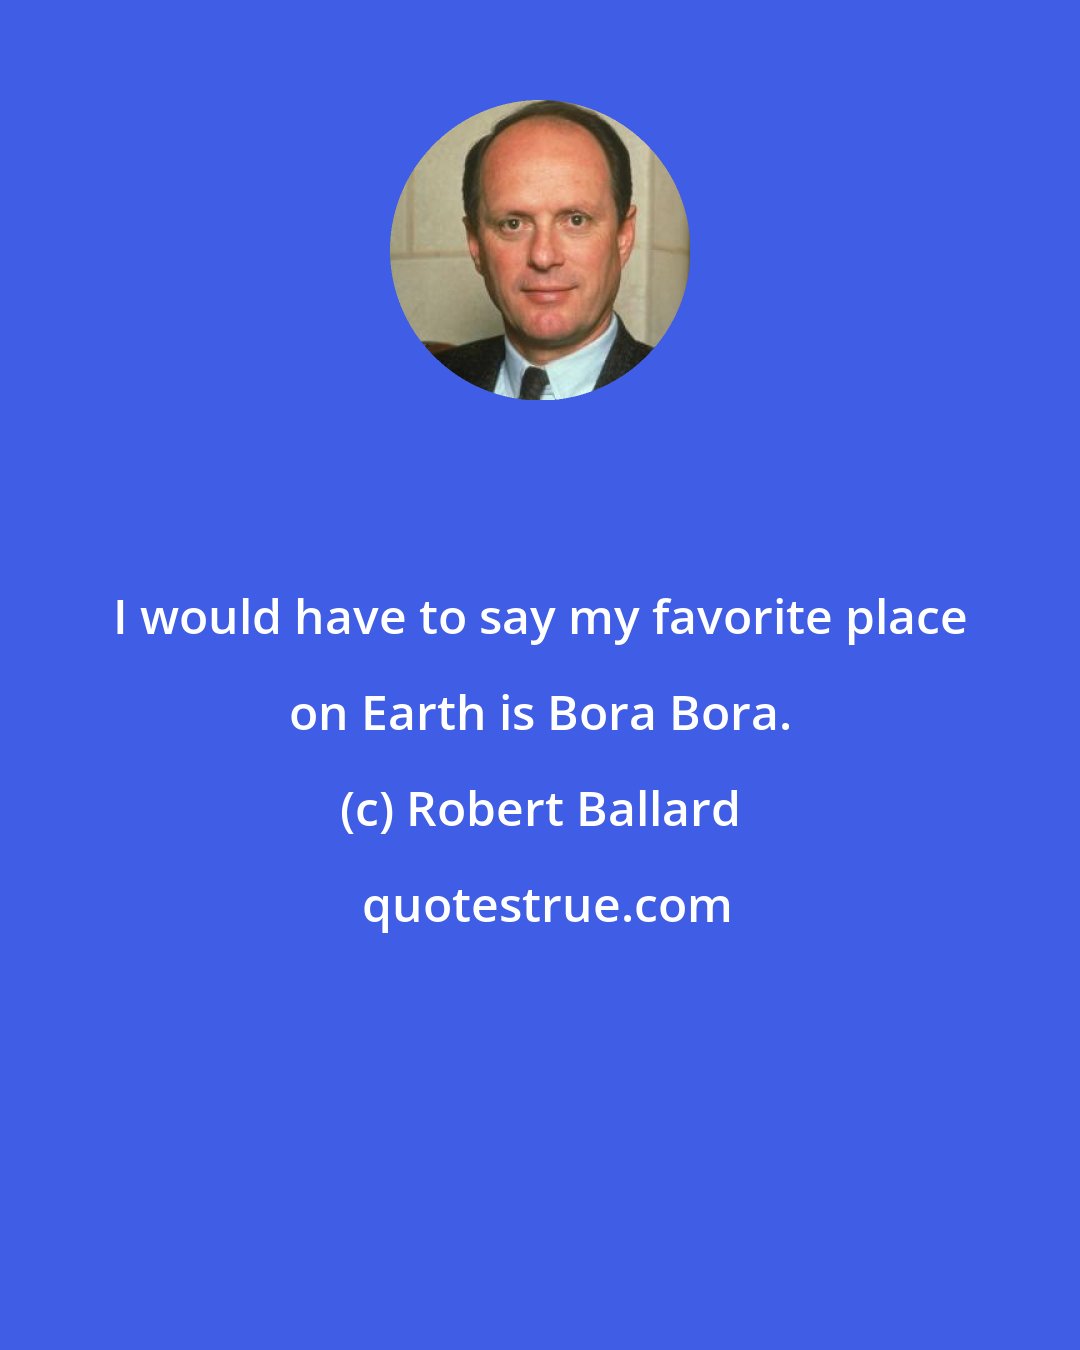 Robert Ballard: I would have to say my favorite place on Earth is Bora Bora.